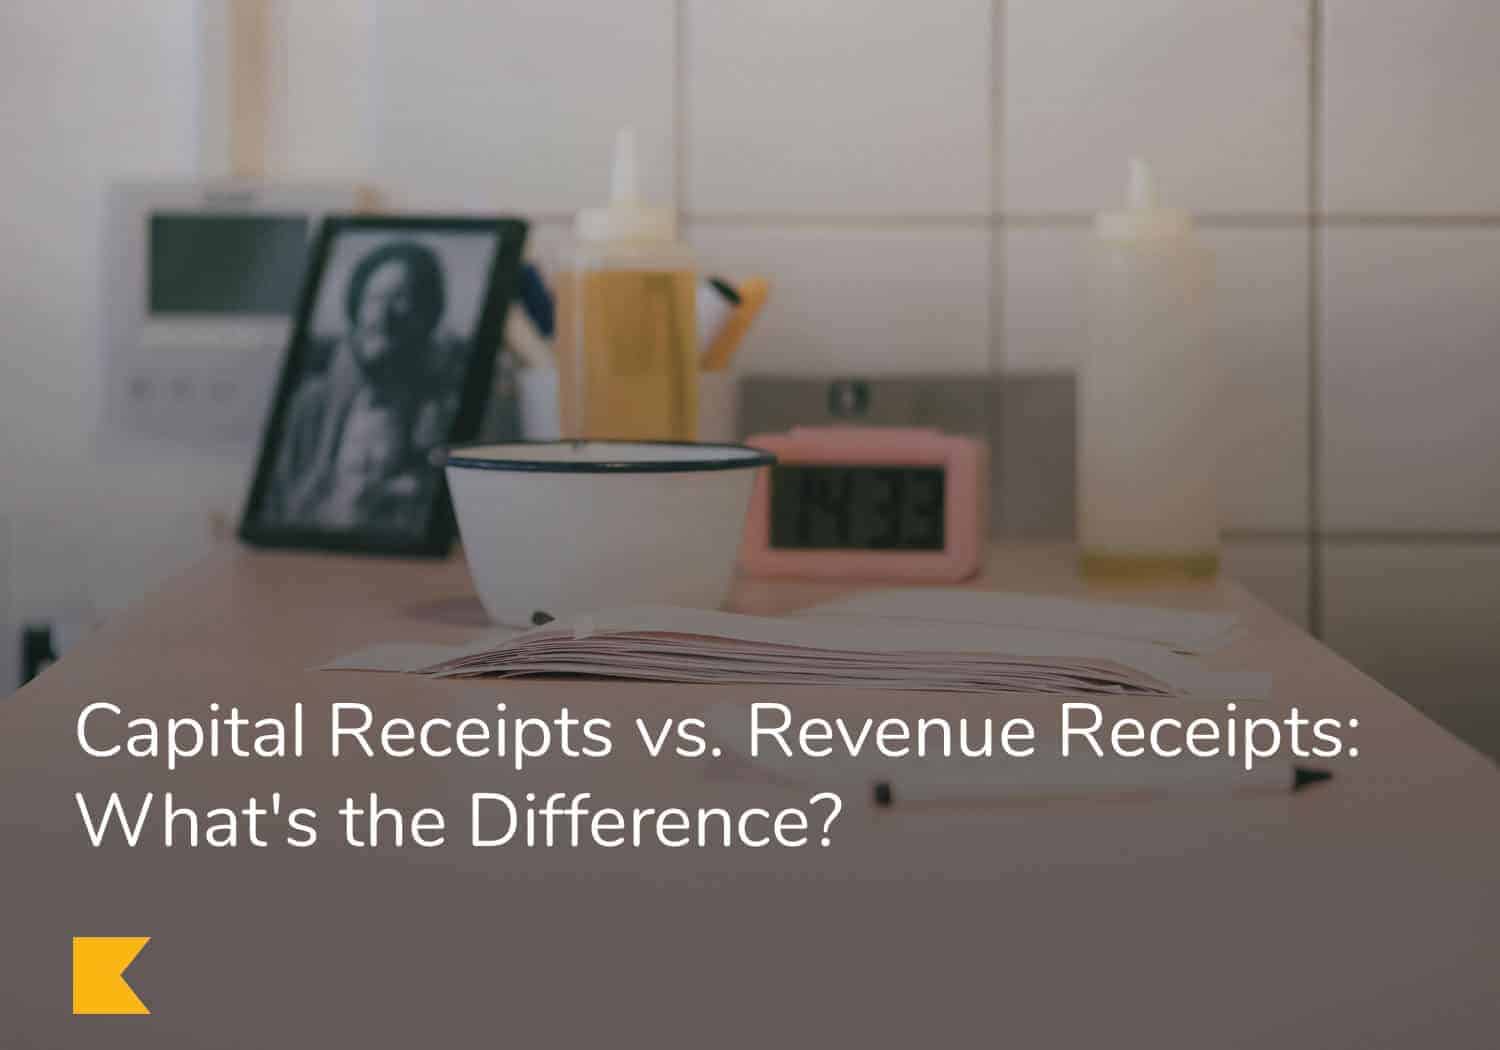 Capital Receipts vs. Revenue Receipts: What's the Difference?